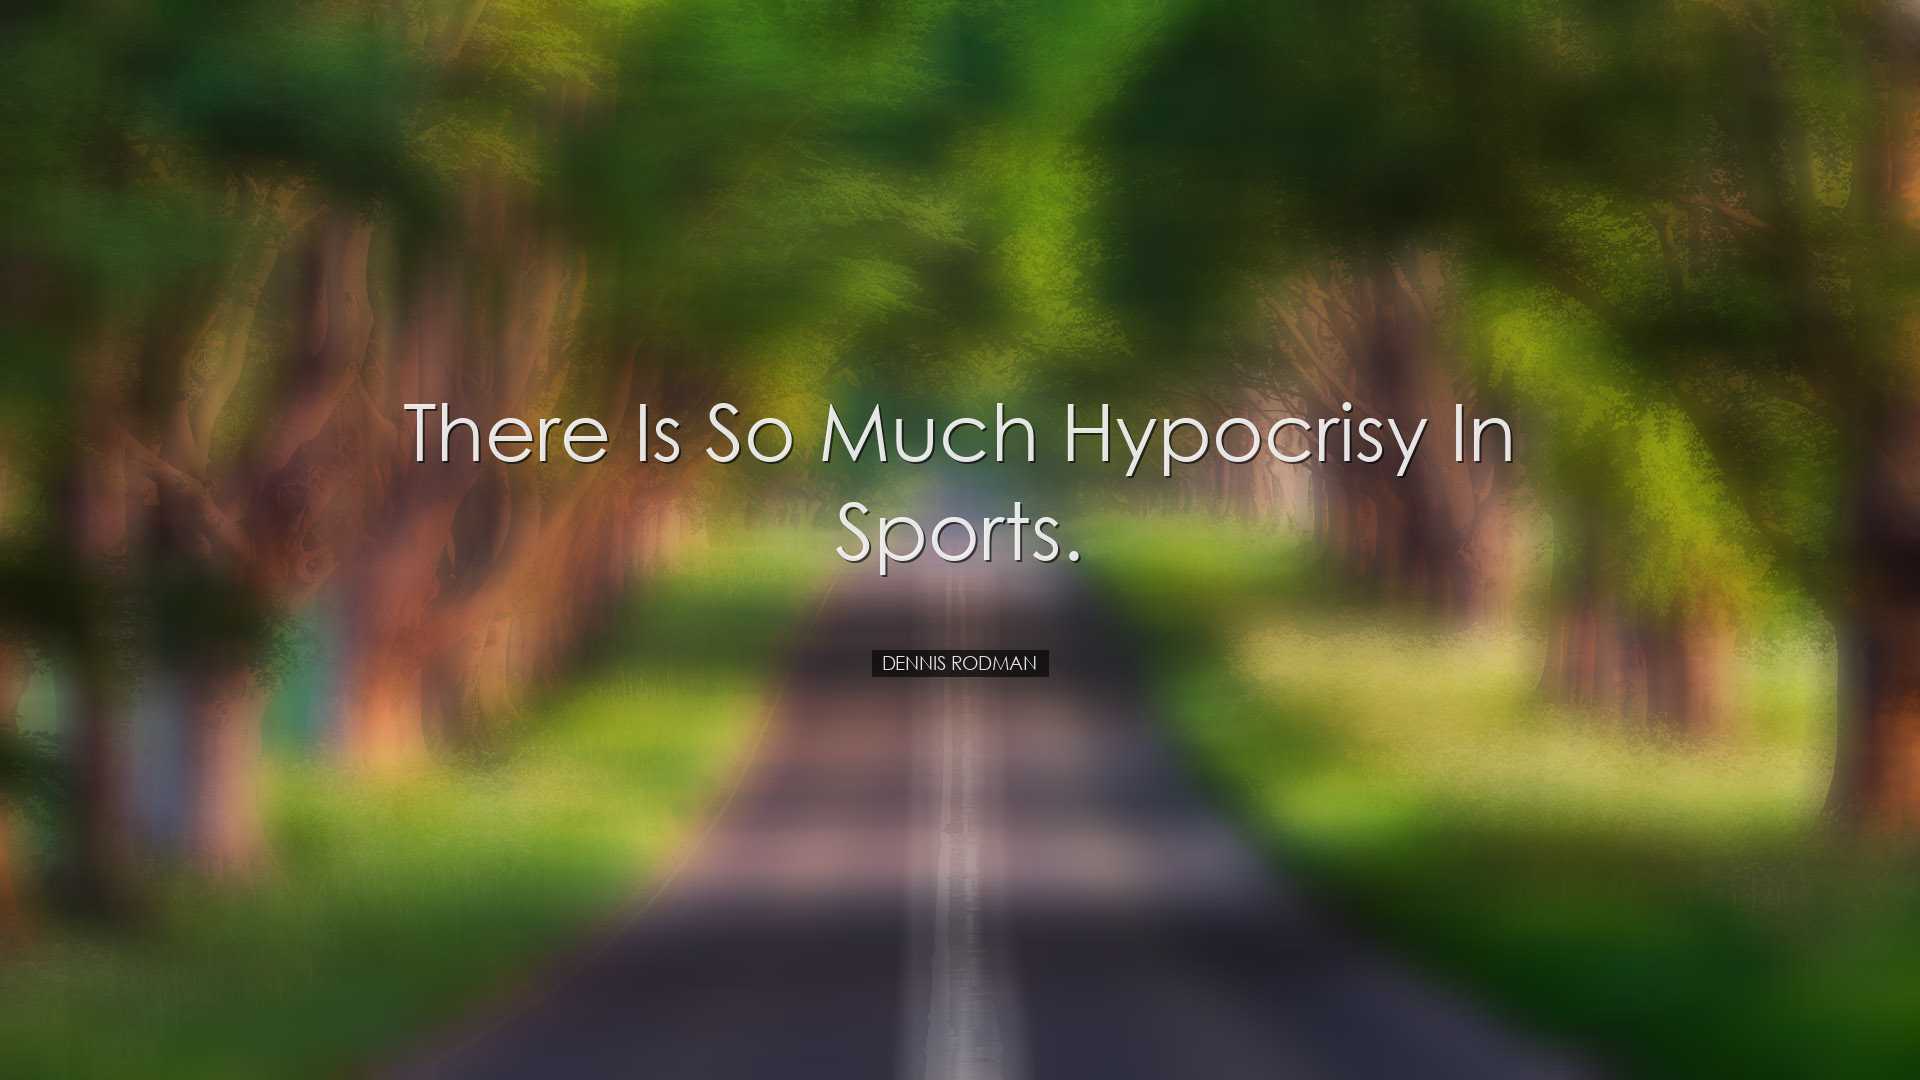 There is so much hypocrisy in sports. - Dennis Rodman